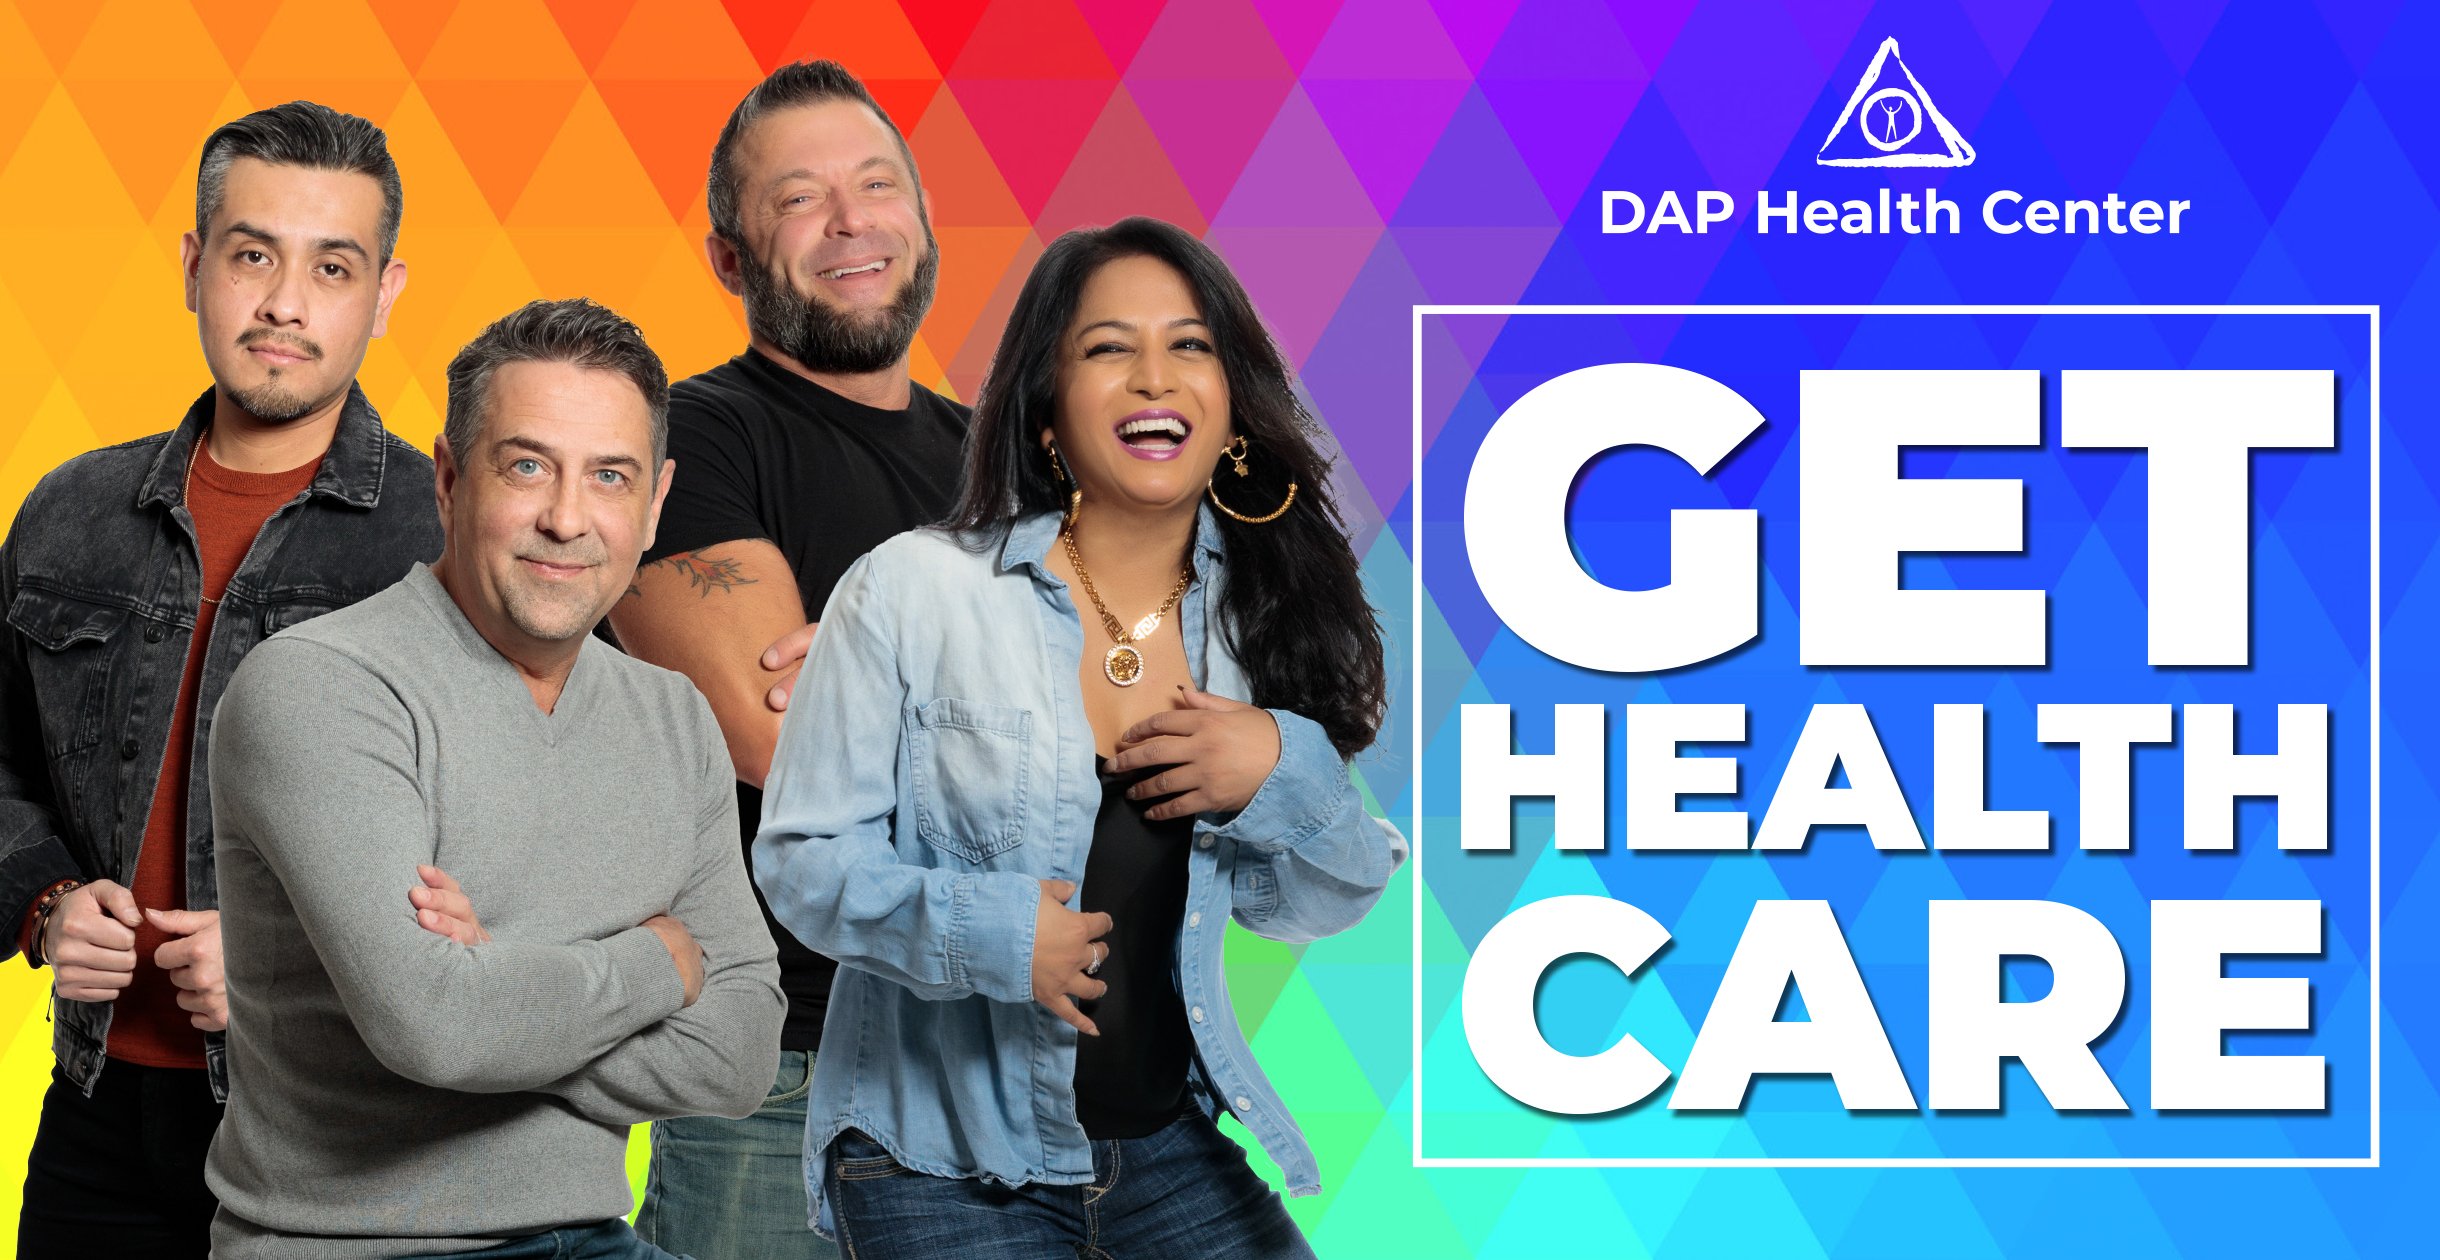 Get Insurance and Care with DAP